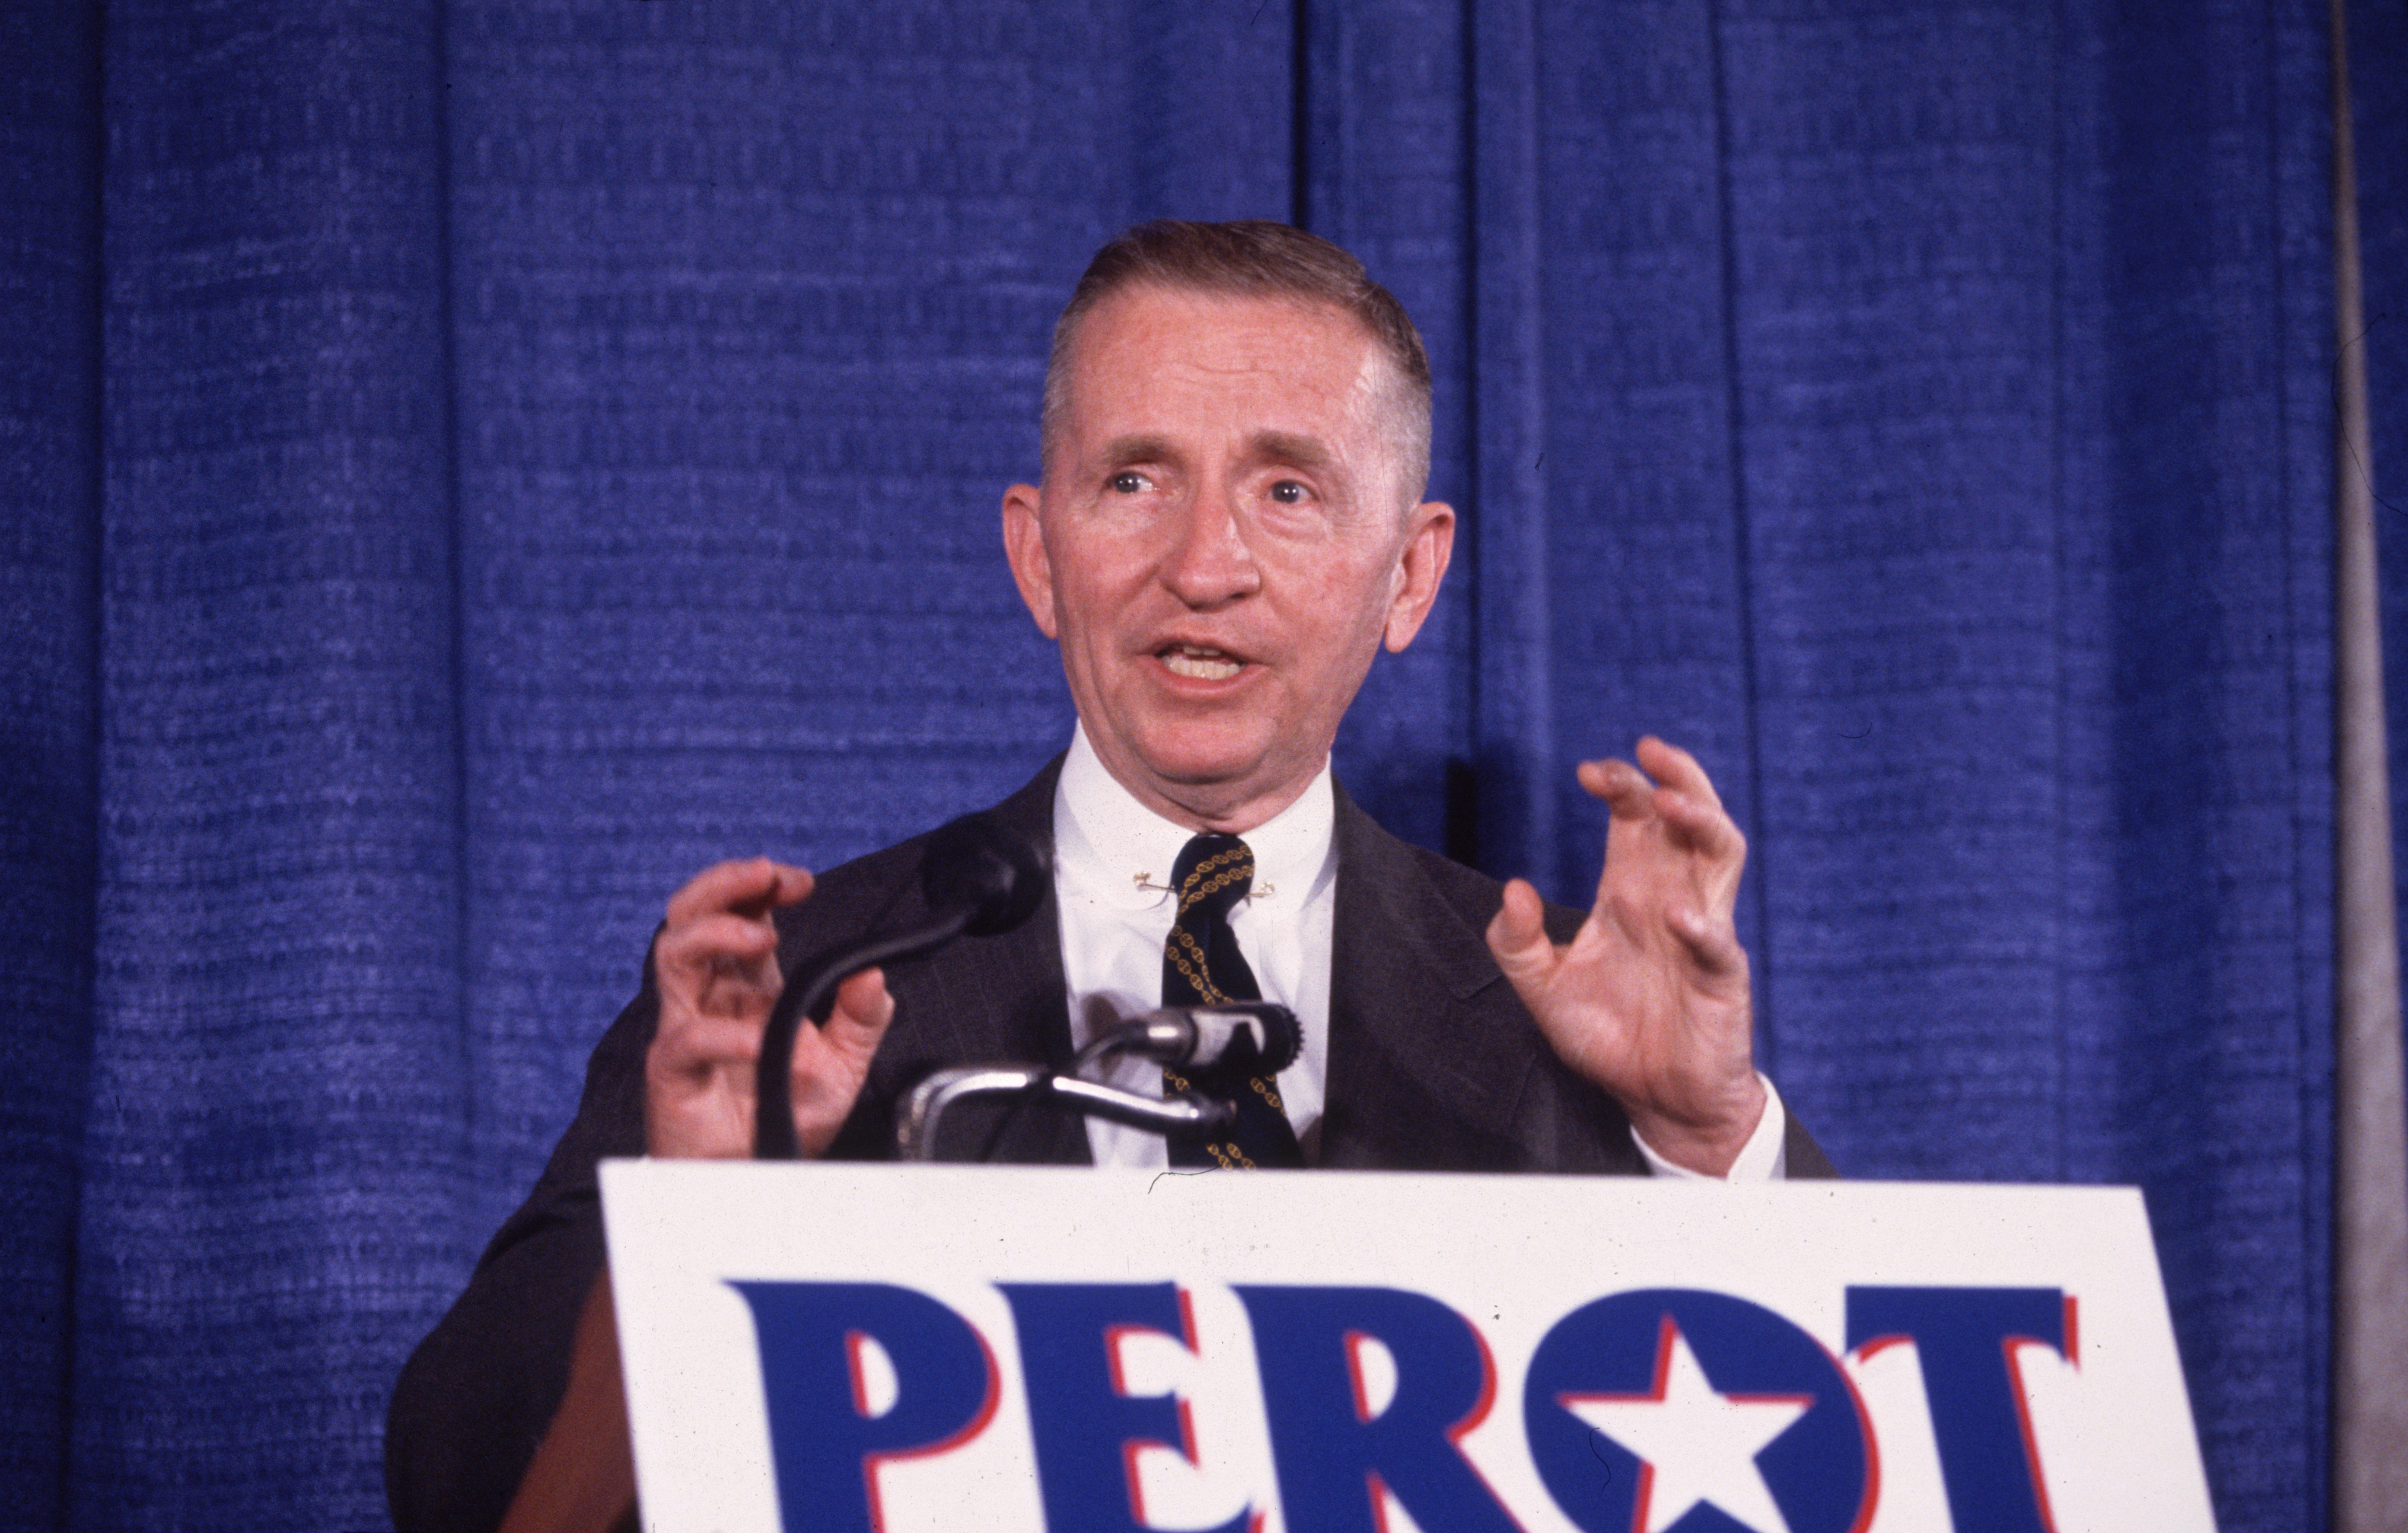 American businessman and politician Ross Perot, undeclared candidate for president, speaking and gesticulating at a podium during a press conference, Annapolis, Maryland.